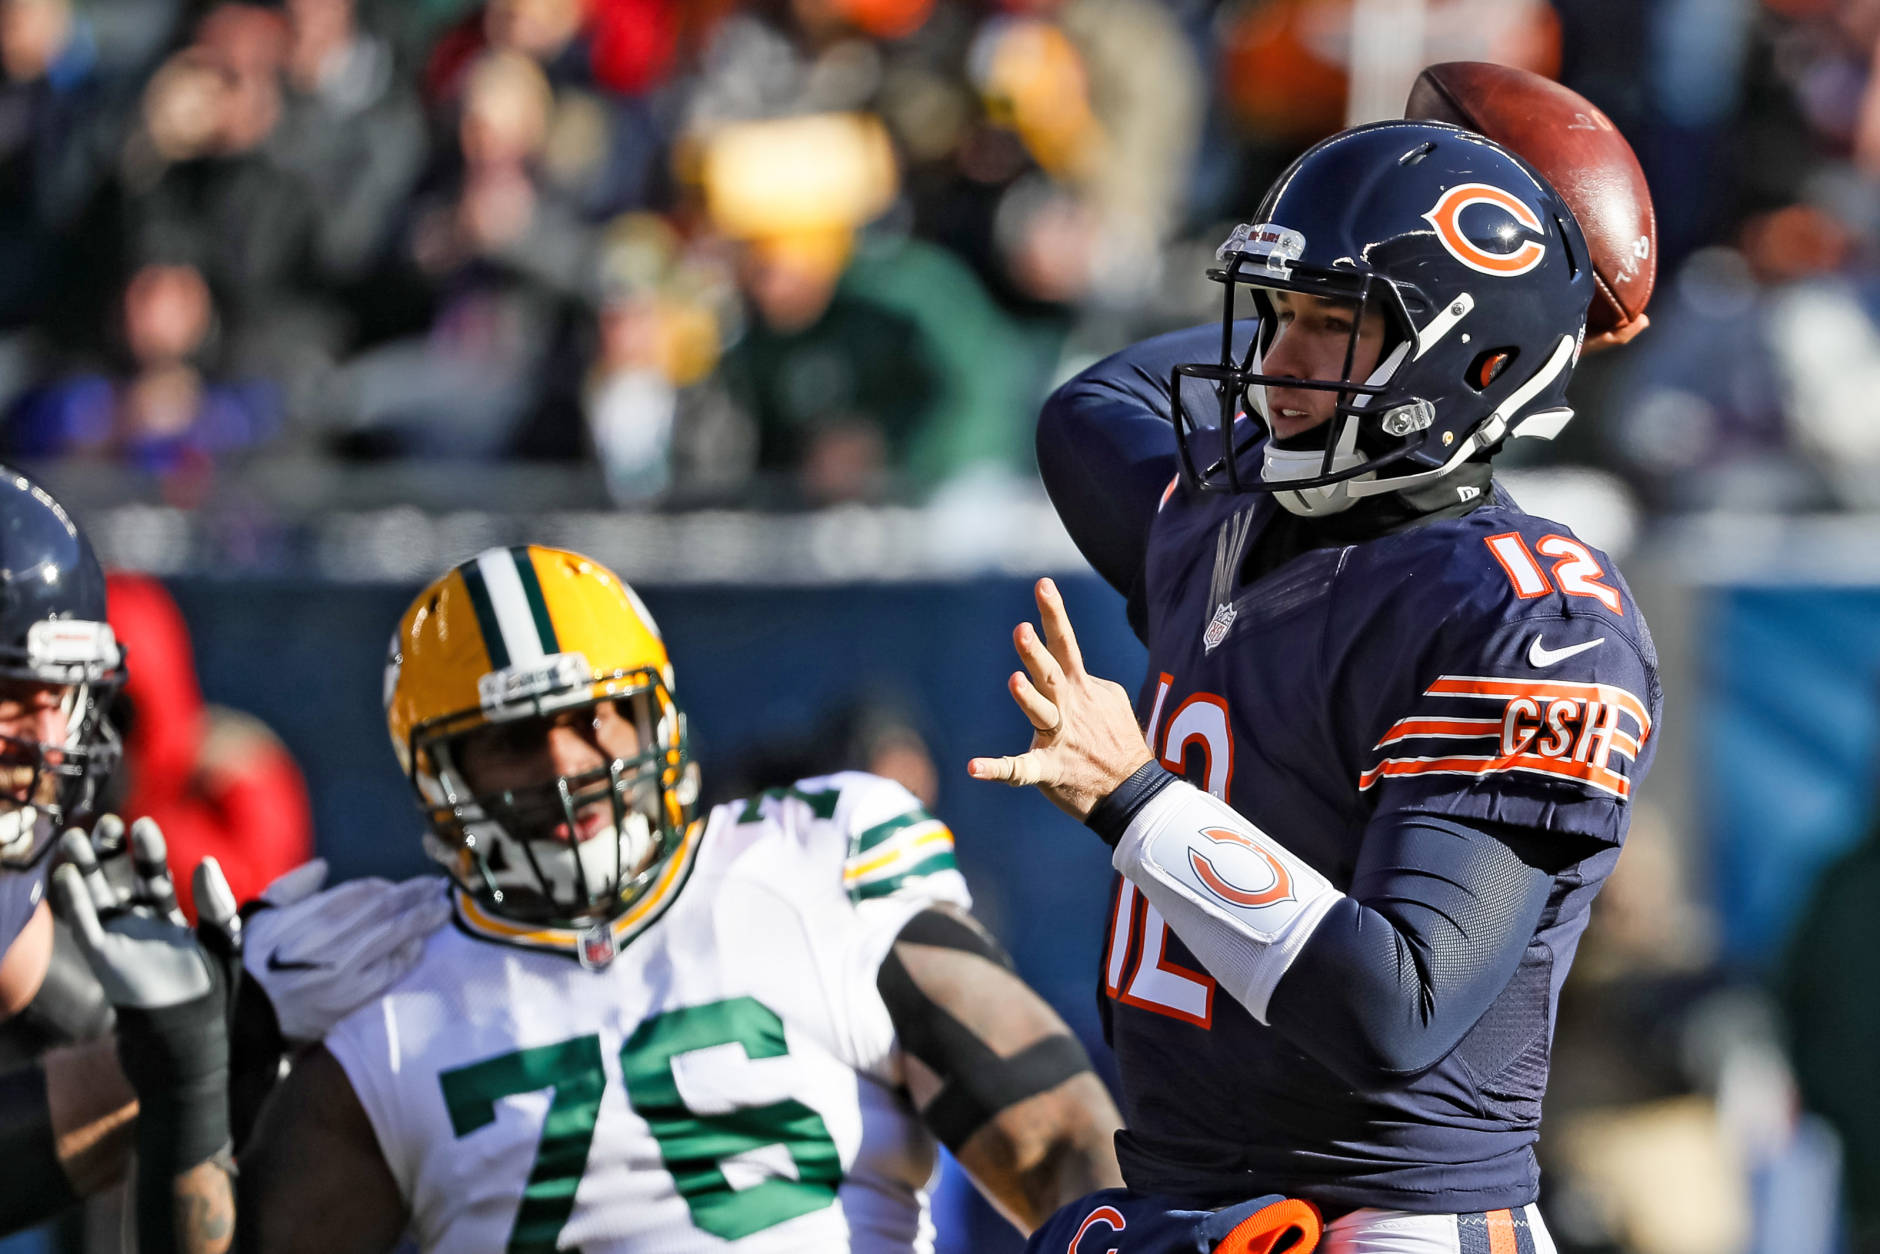 CHICAGO, IL - DECEMBER 18:   Quarterback Matt Barkley #12 of the Chicago Bears looks to pass in the first quarter against the Green Bay Packers at Soldier Field on December 18, 2016 in Chicago, Illinois.  (Photo by Jonathan Daniel/Getty Images)